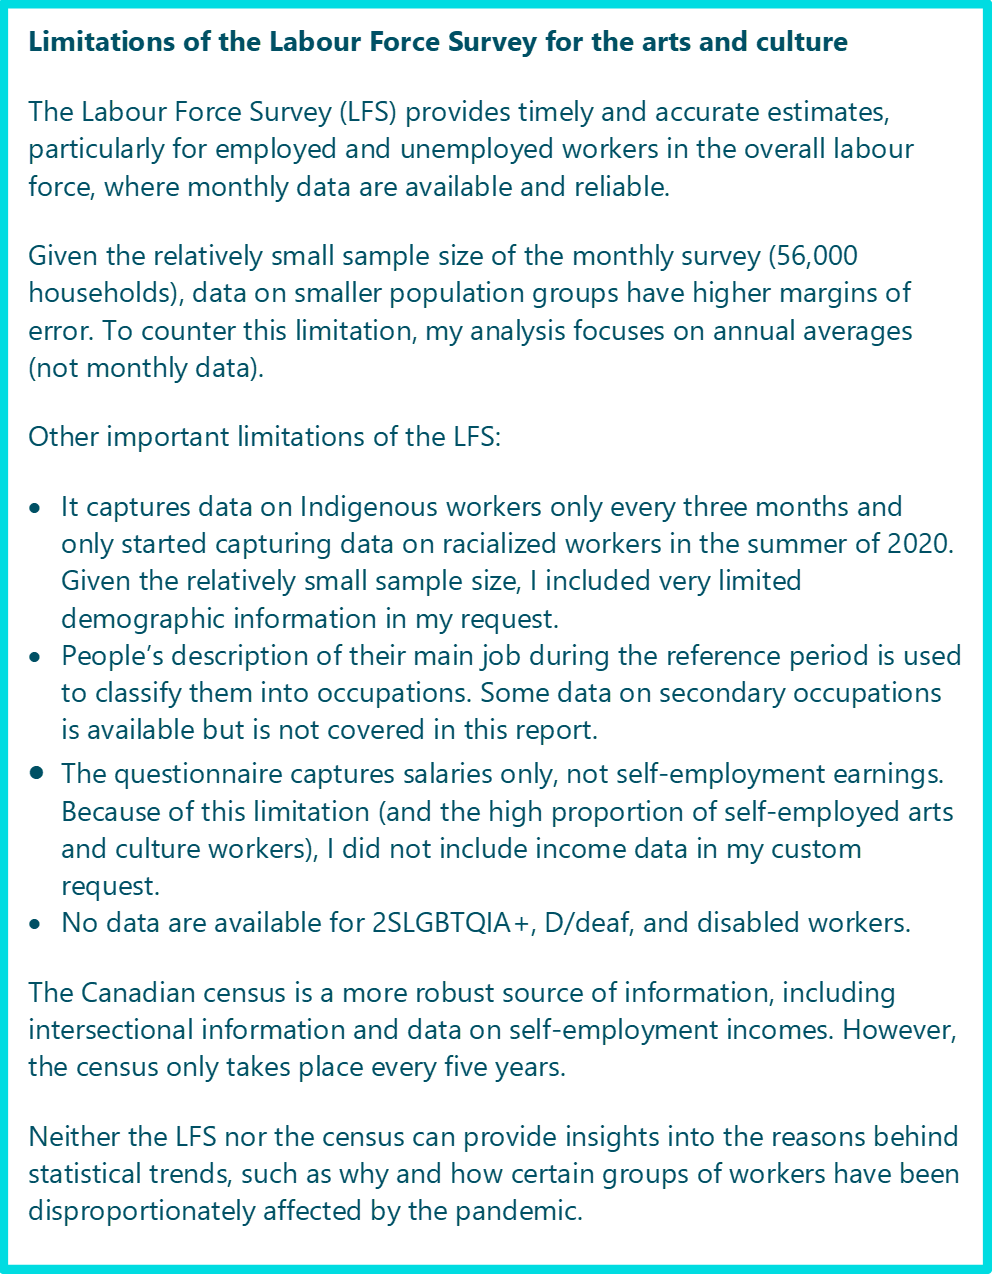 Limitations of the Labour Force Survey for the arts and culture The Labour Force Survey (LFS) provides timely and accurate estimates, particularly for employed and unemployed workers in the overall labour force, where monthly data are available and reliable. Given the relatively small sample size of the monthly survey (56,000 households), data on smaller population groups have higher margins of error. To counter this limitation, my analysis focuses on annual averages (not monthly data). Other important limitations of the LFS: •	It captures data on Indigenous workers only every three months and only started capturing data on racialized workers in the summer of 2020. Given the relatively small sample size, I included very limited demographic information in my request. •	People’s description of their main job during the reference period is used to classify them into occupations. Some data on secondary occupations is available but is not covered in this report. •	The questionnaire captures salaries only, not self-employment earnings. Because of this limitation (and the high proportion of self-employed arts and culture workers), I did not include income data in my custom request. •	No data are available for 2SLGBTQIA+, D/deaf, and disabled workers. The Canadian census is a more robust source of information, including intersectional information and data on self-employment incomes. However, the census only takes place every five years. Neither the LFS nor the census can provide insights into the reasons behind statistical trends, such as why and how certain groups of workers have been disproportionately affected by the pandemic.